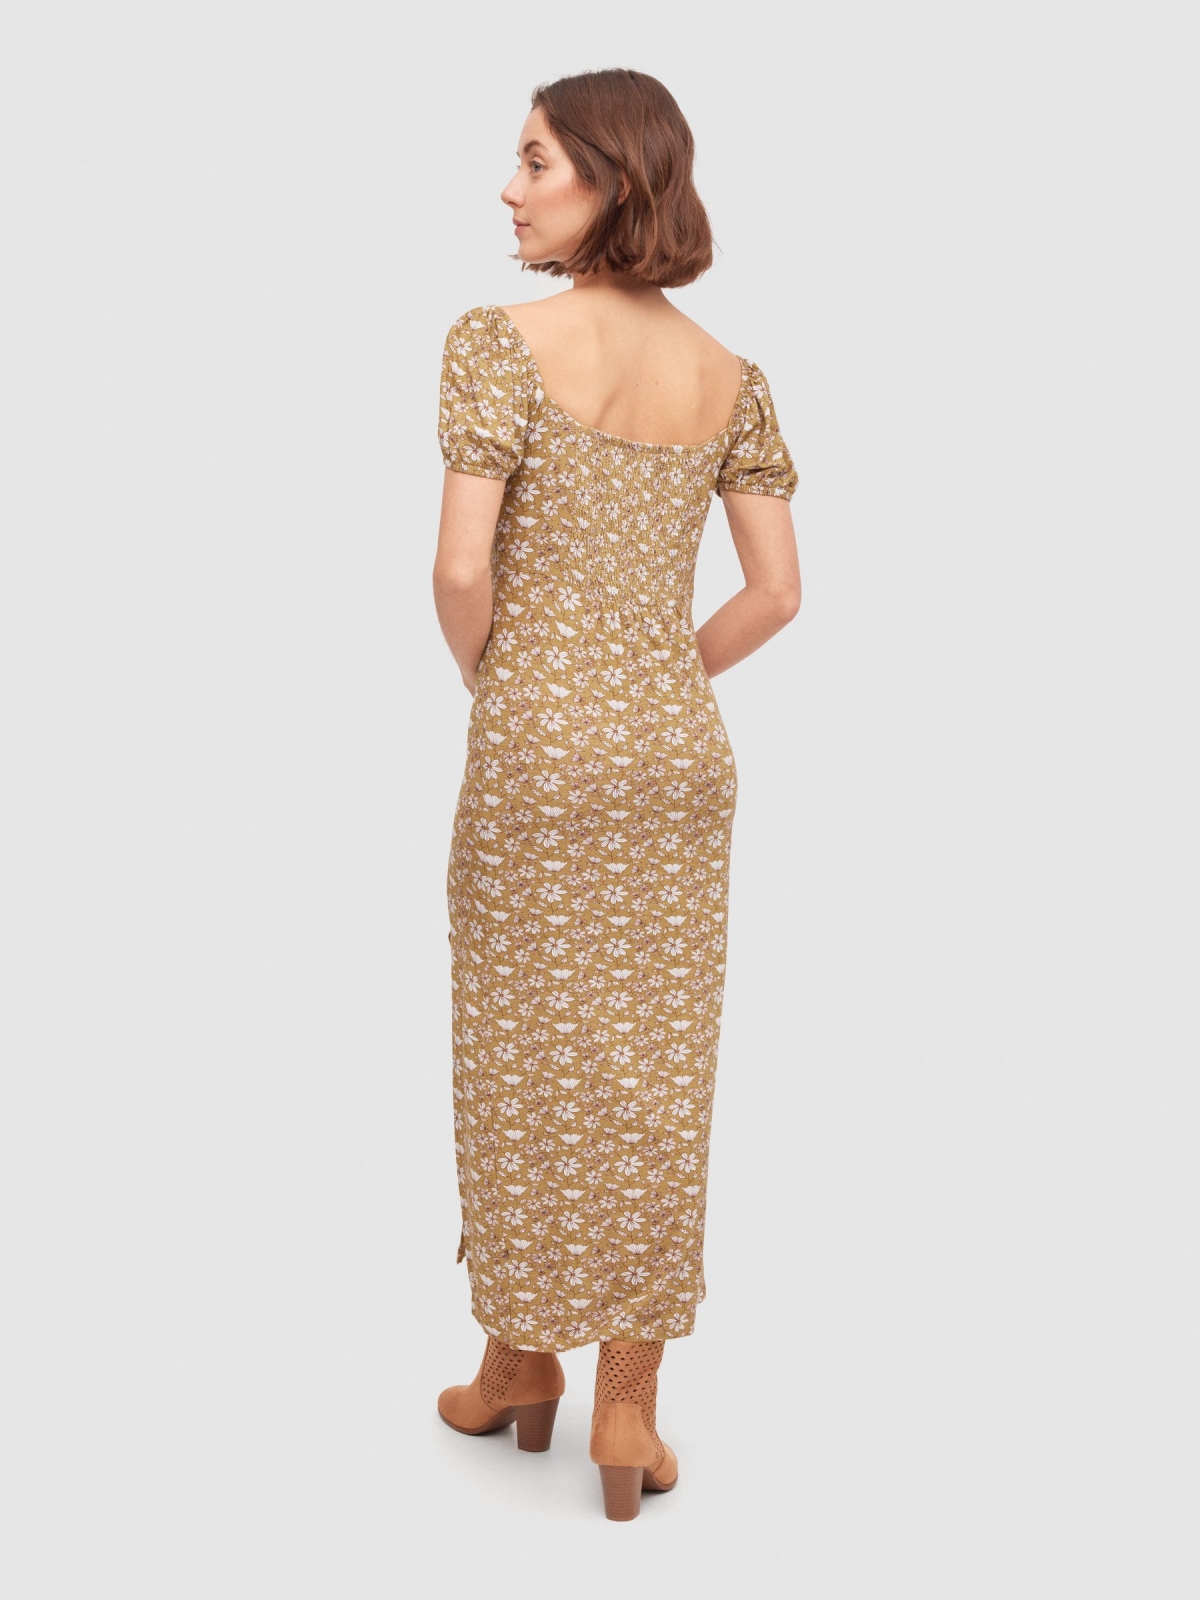 Floral midi dress sand middle back view